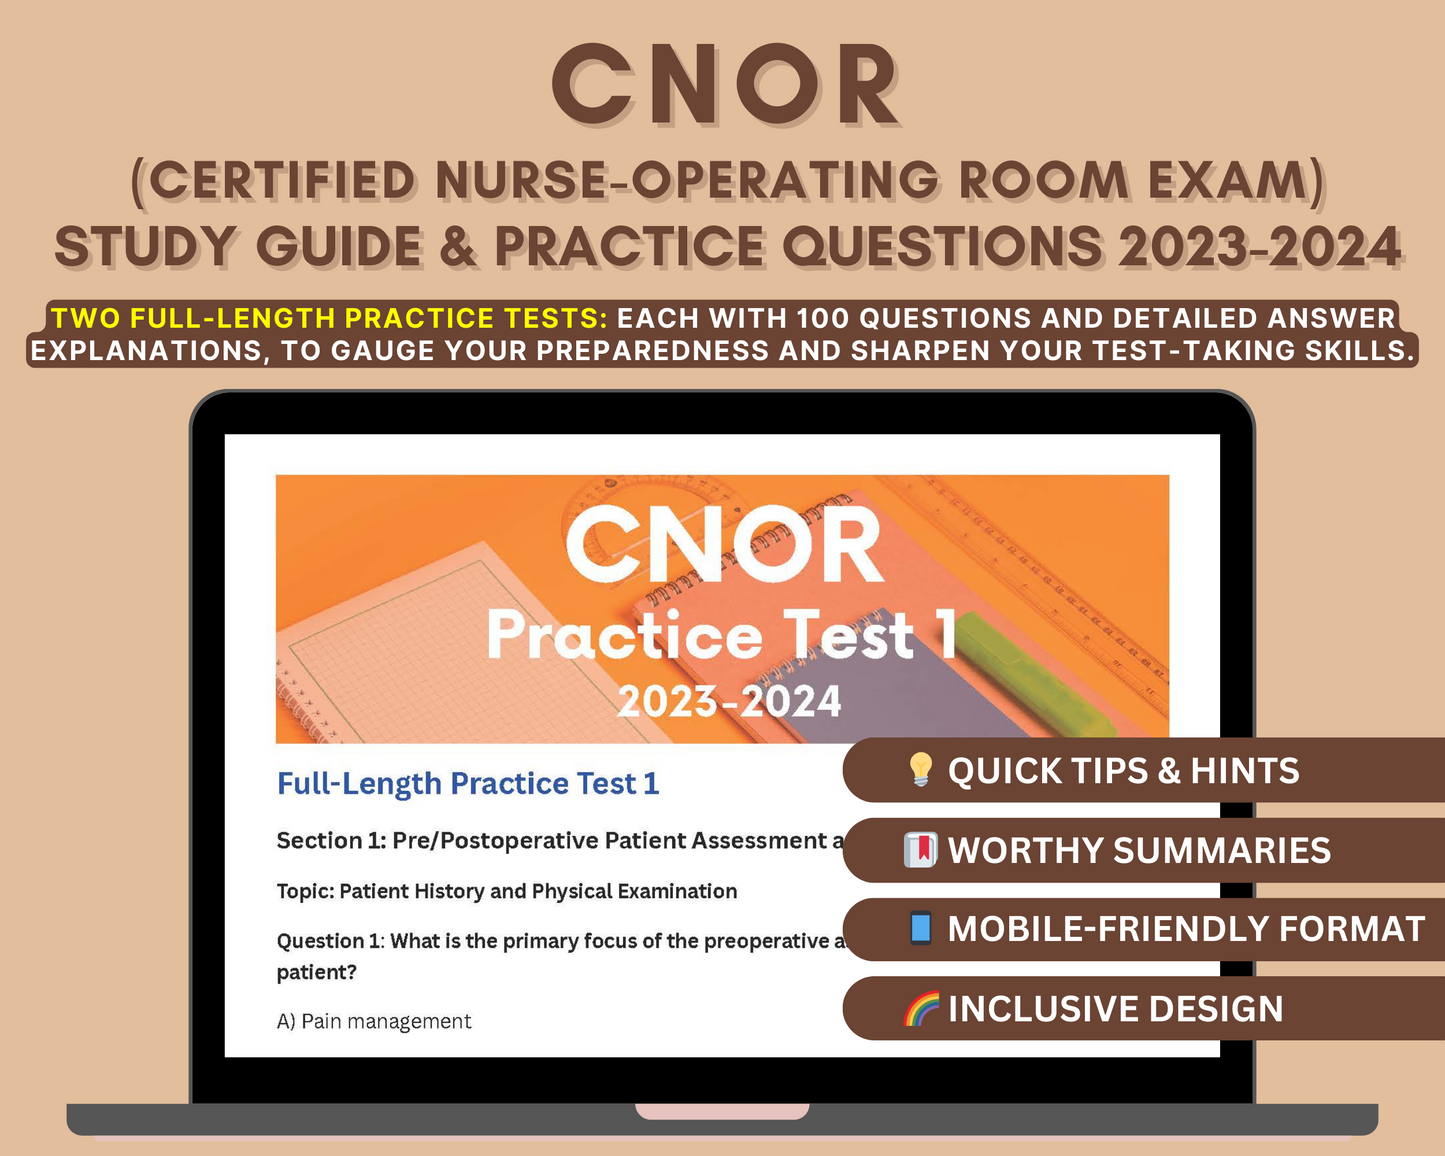 CNOR Study Guide 2023-2024: Perioperative Nursing Certification Prep with In-Depth Content Review, and Practice Tests